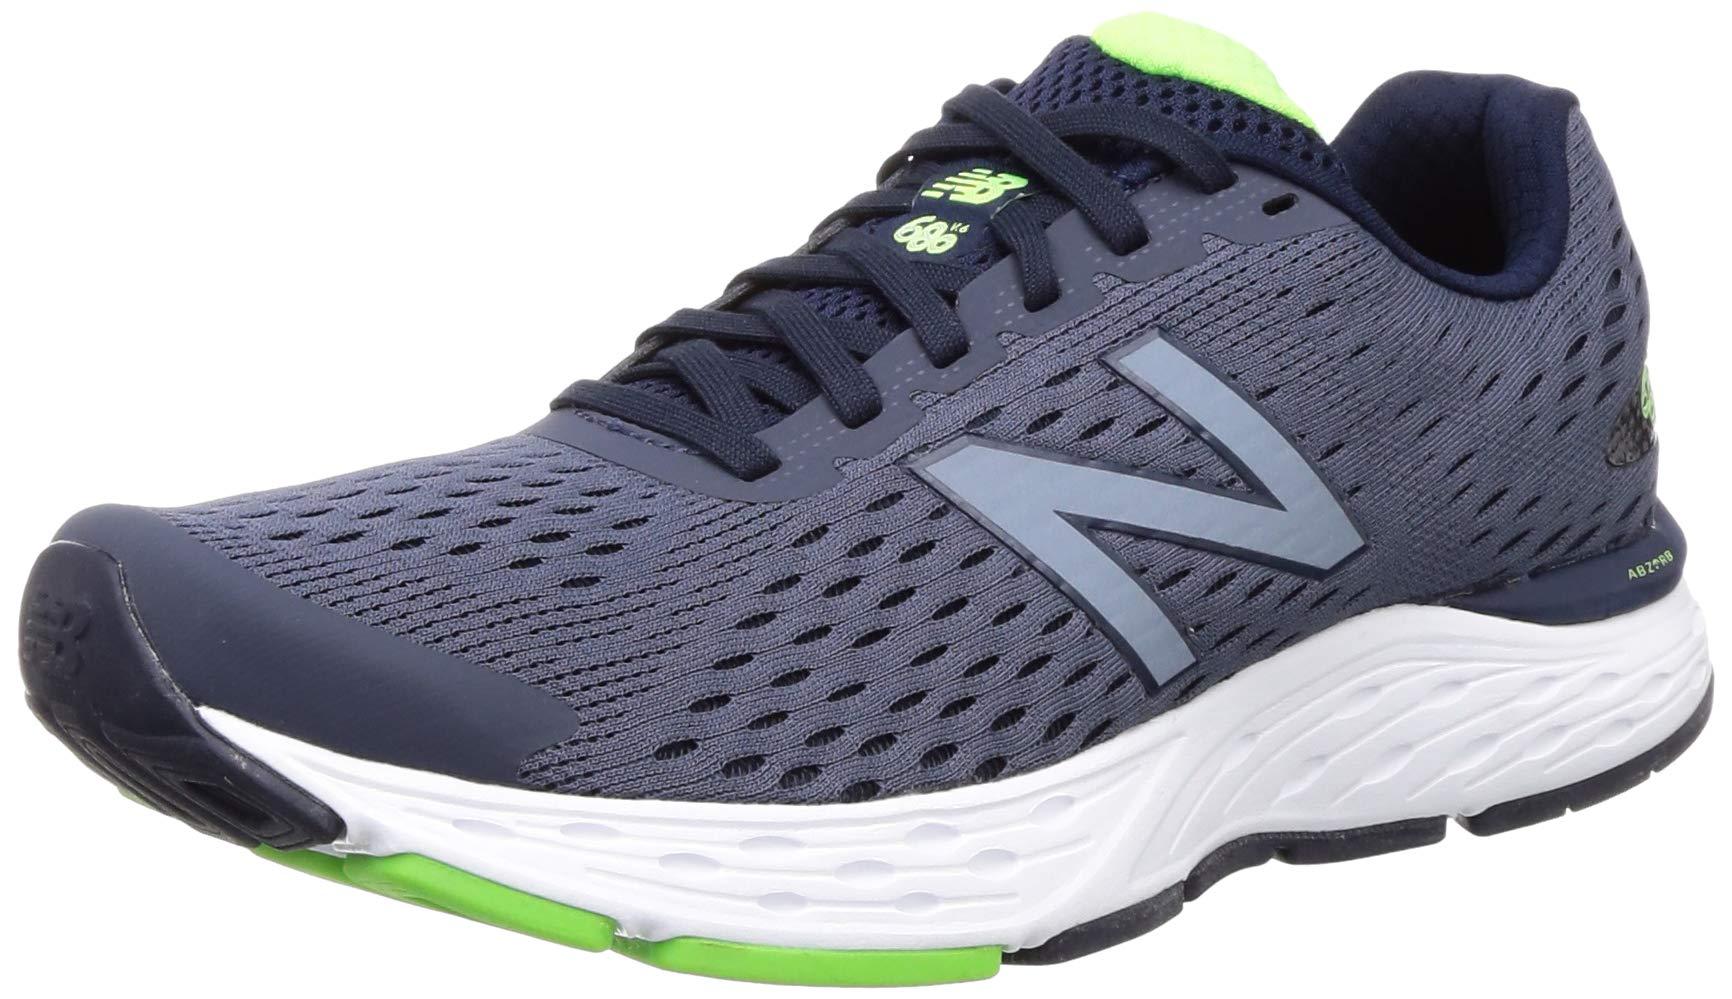 New Balance Synthetic 680 V6 Running Shoe in Blue for Men - Save 14% - Lyst